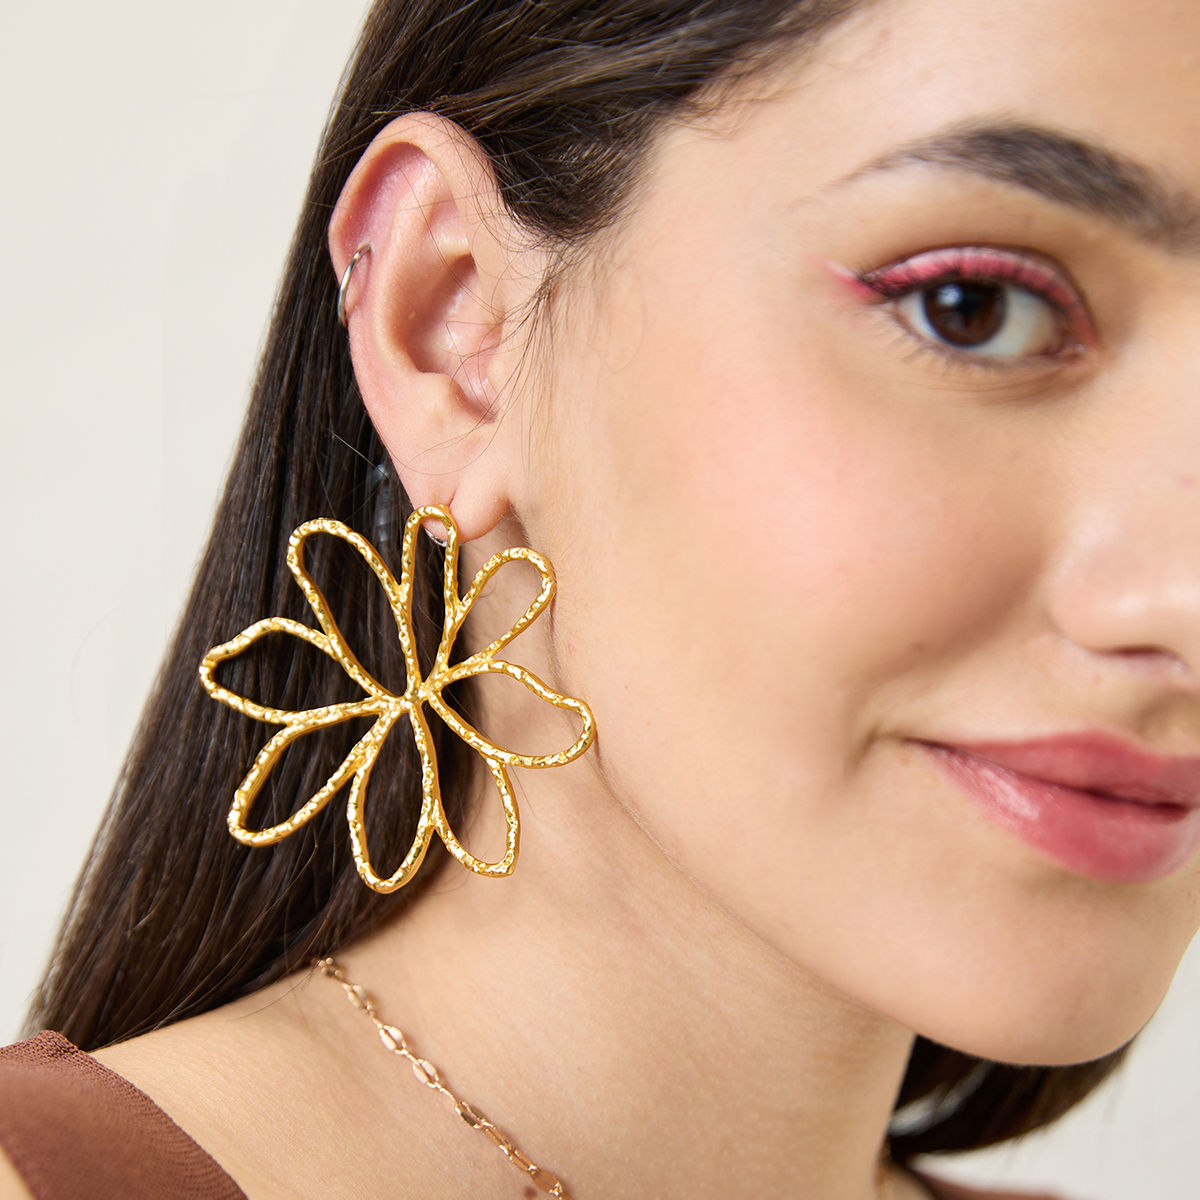 Shoshaa Set Of 2 GoldPlated  SilverPlated Floral Shape Drop Earring